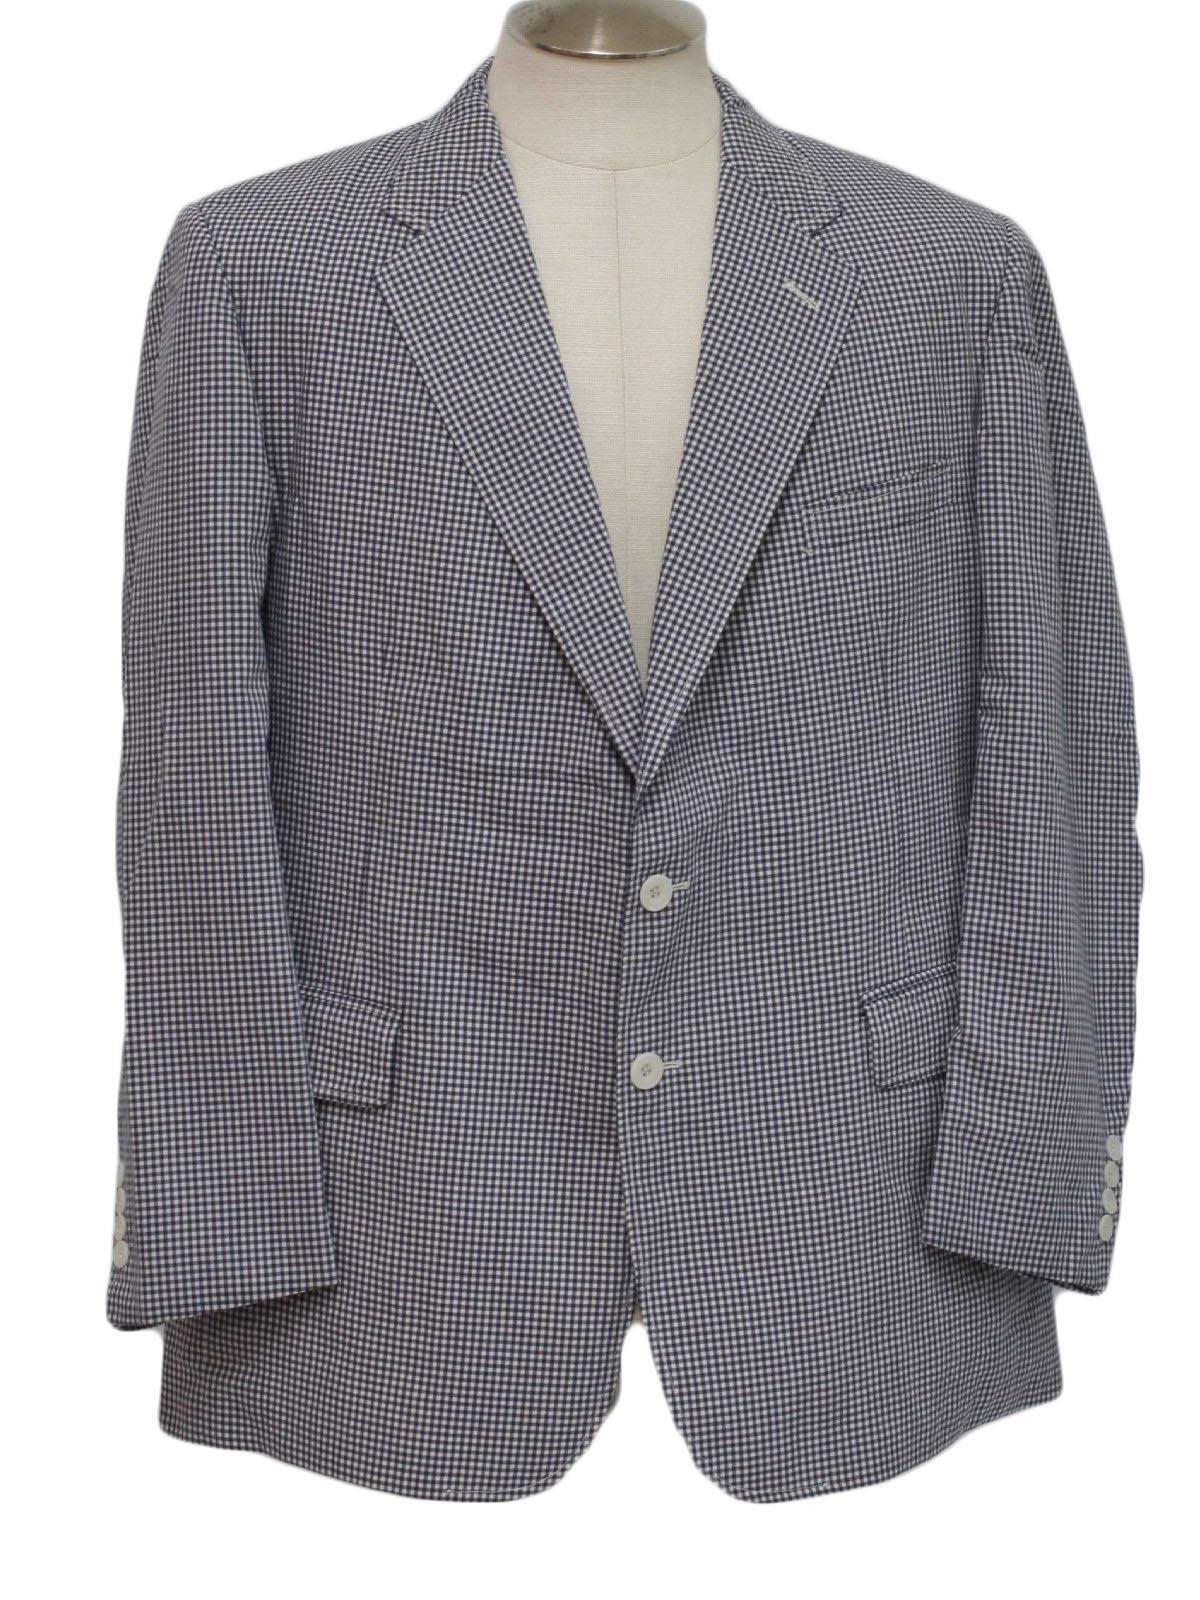 70s Jacket: 70s -No Label- Mens navy blue and white gingham polyester ...